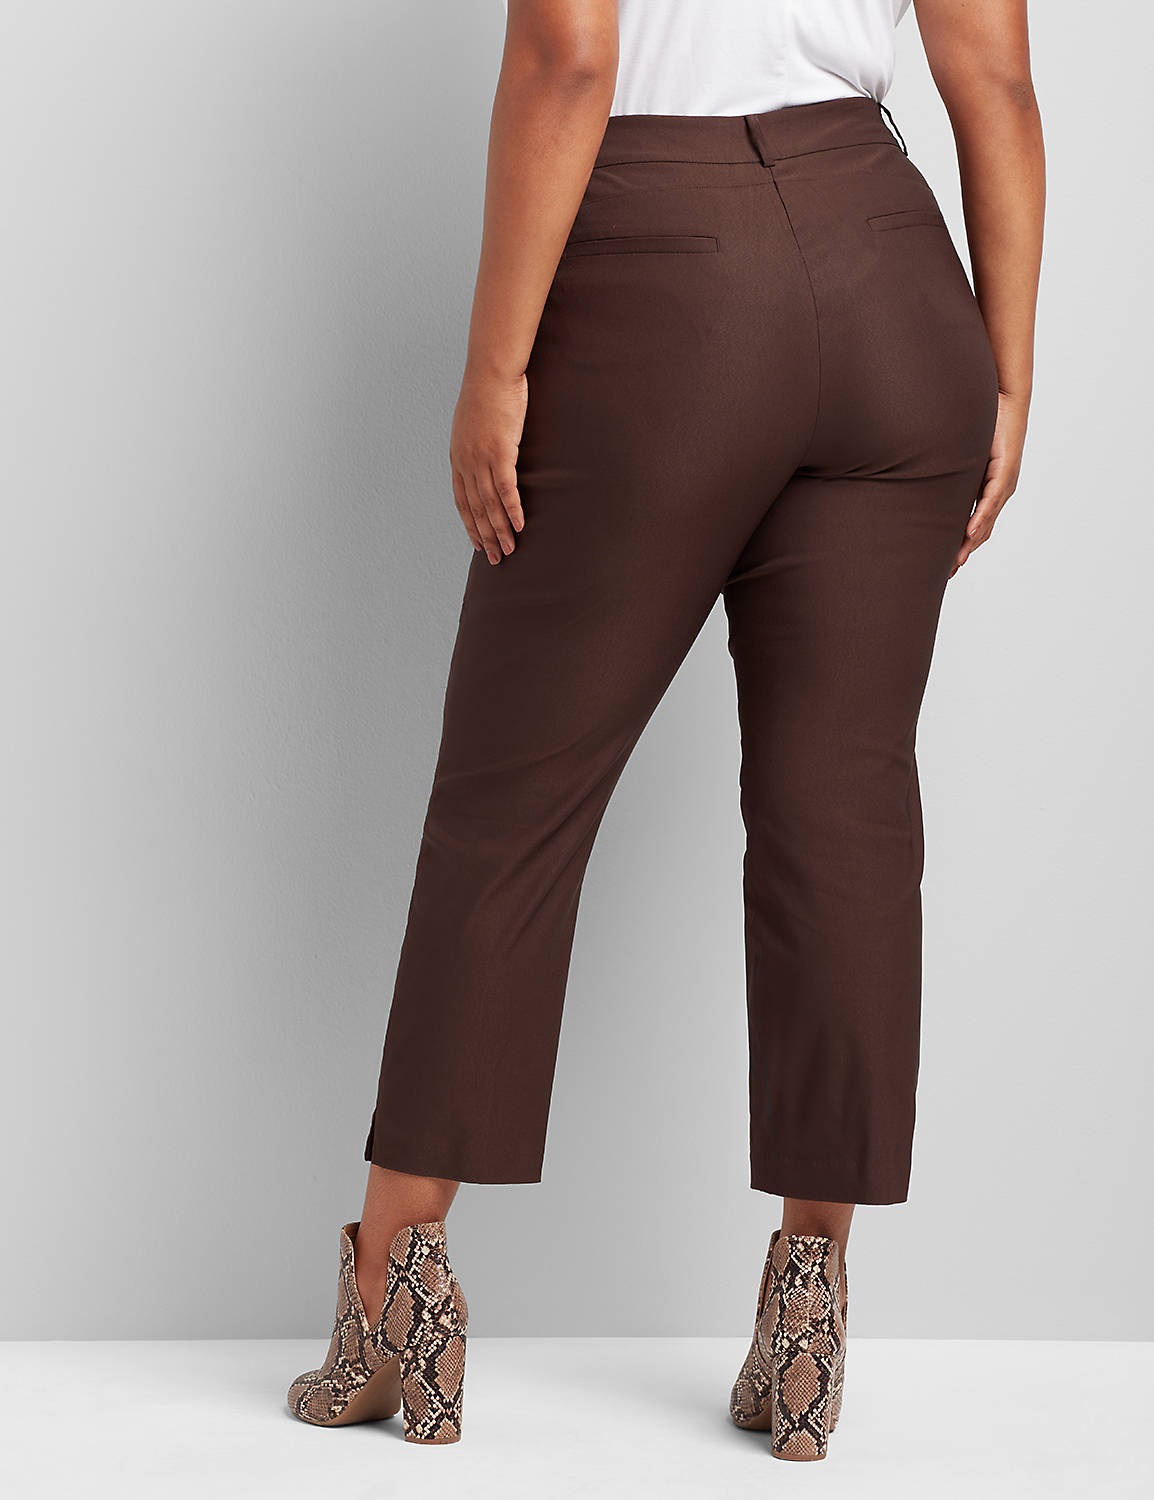 Allie Mid Rise Ankle 1117966:PANTONE Coffee Bean:12 Product Image 2